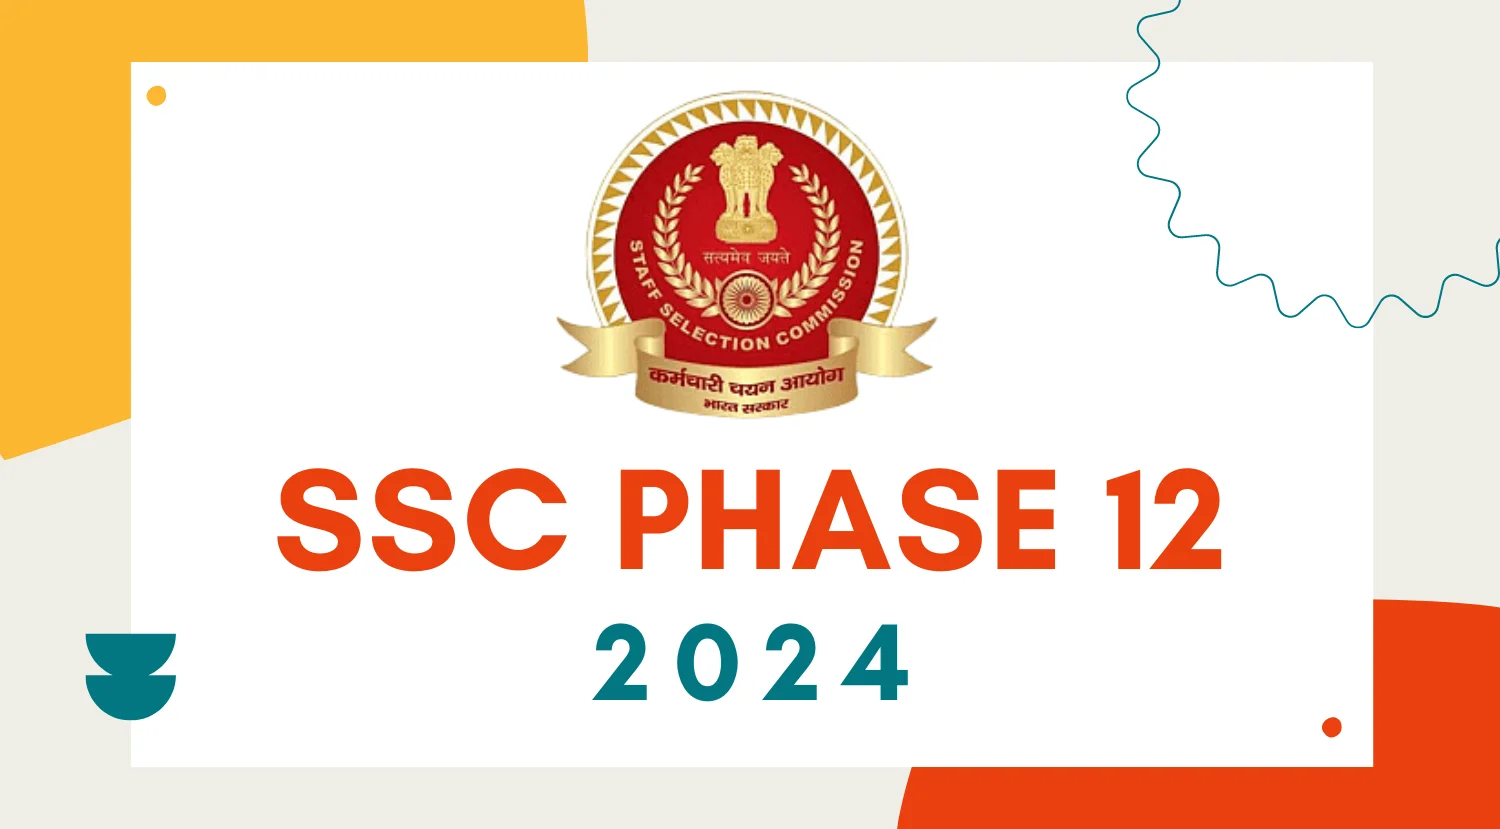 Staff Selection Commission made a big announcement about SSC Phase 12